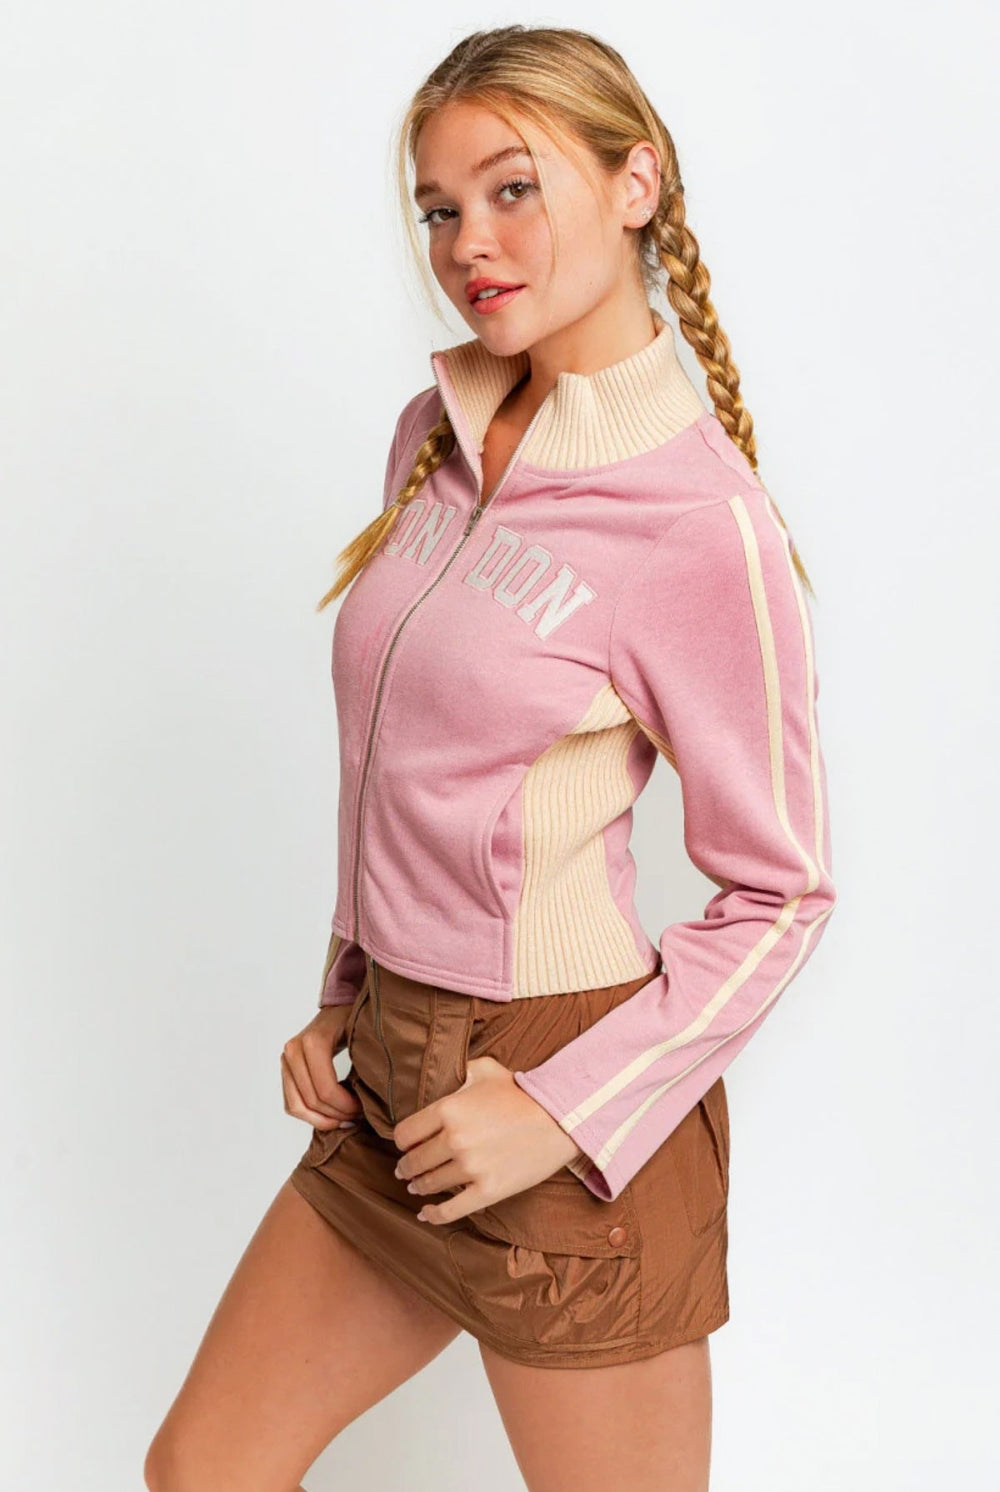 Trendy young woman showcasing a soft pink zip-up jacket with "LONDON" embroidered across the chest.